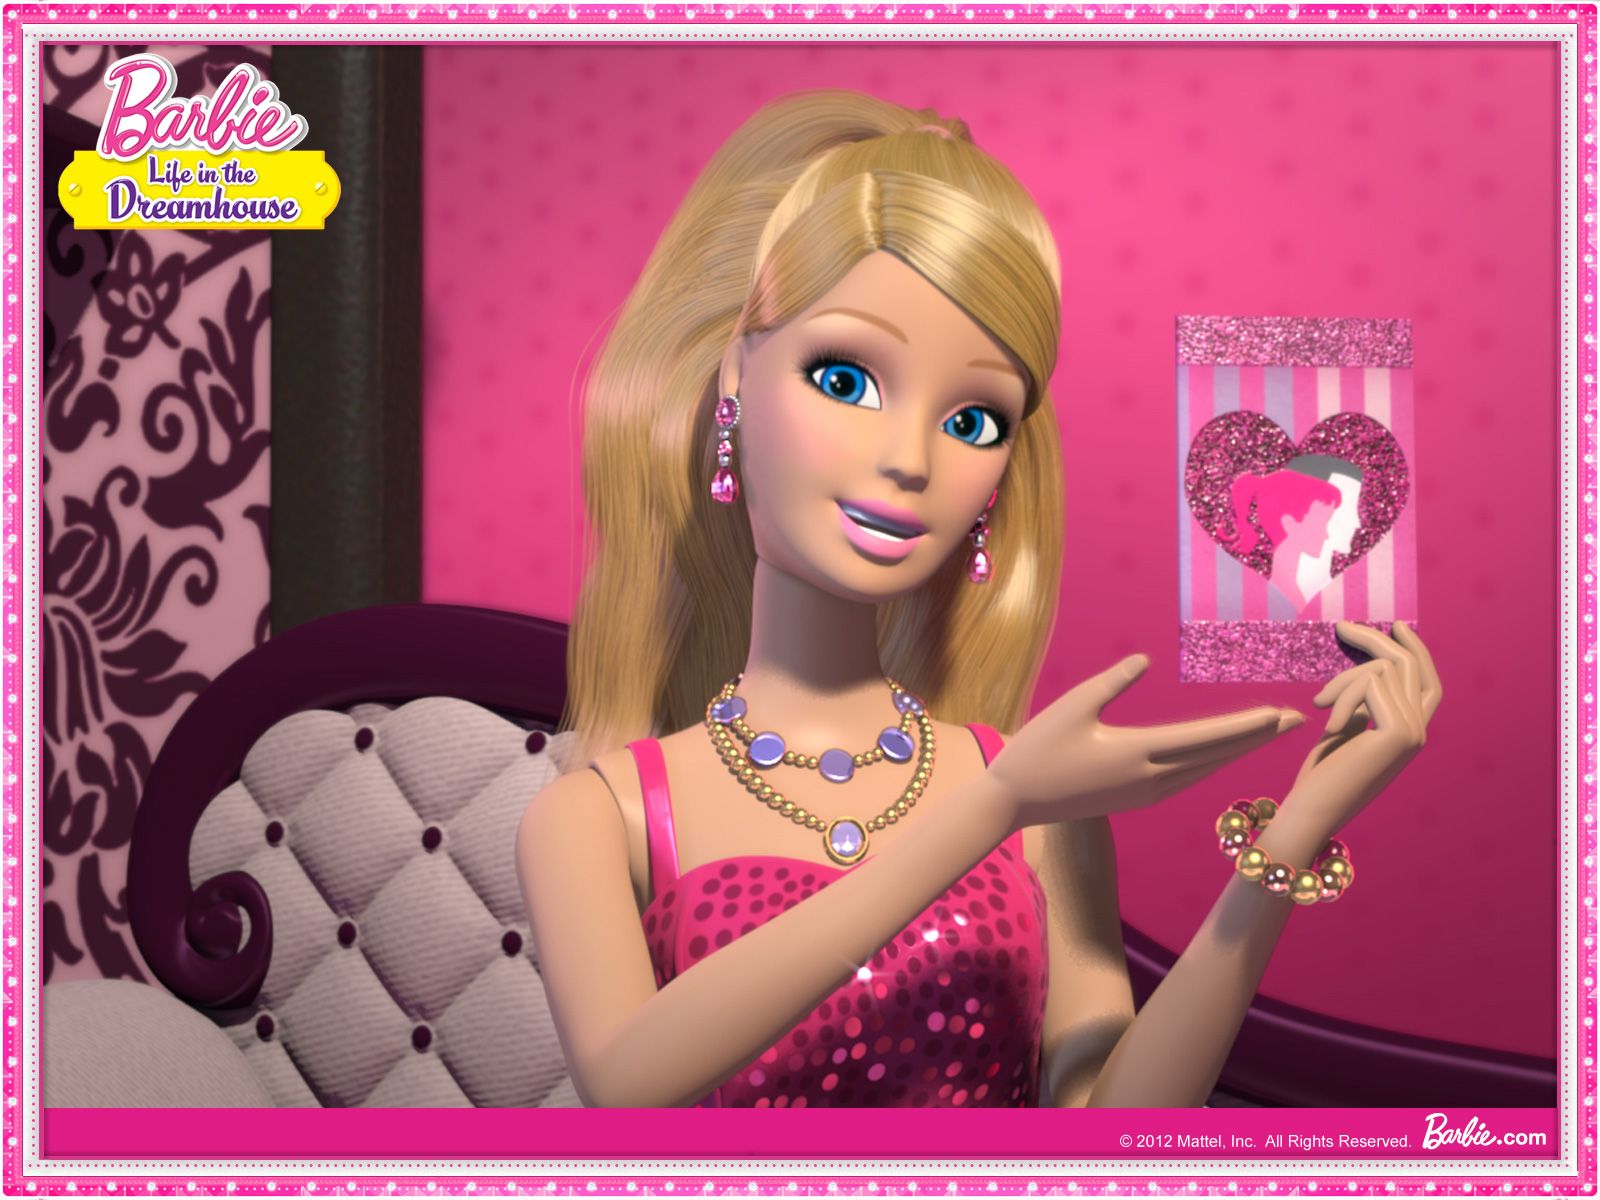 Barbie Wallpaper: Life in the Dreamhouse Wallpaper. Barbie life, Barbie dream house, Barbie movies